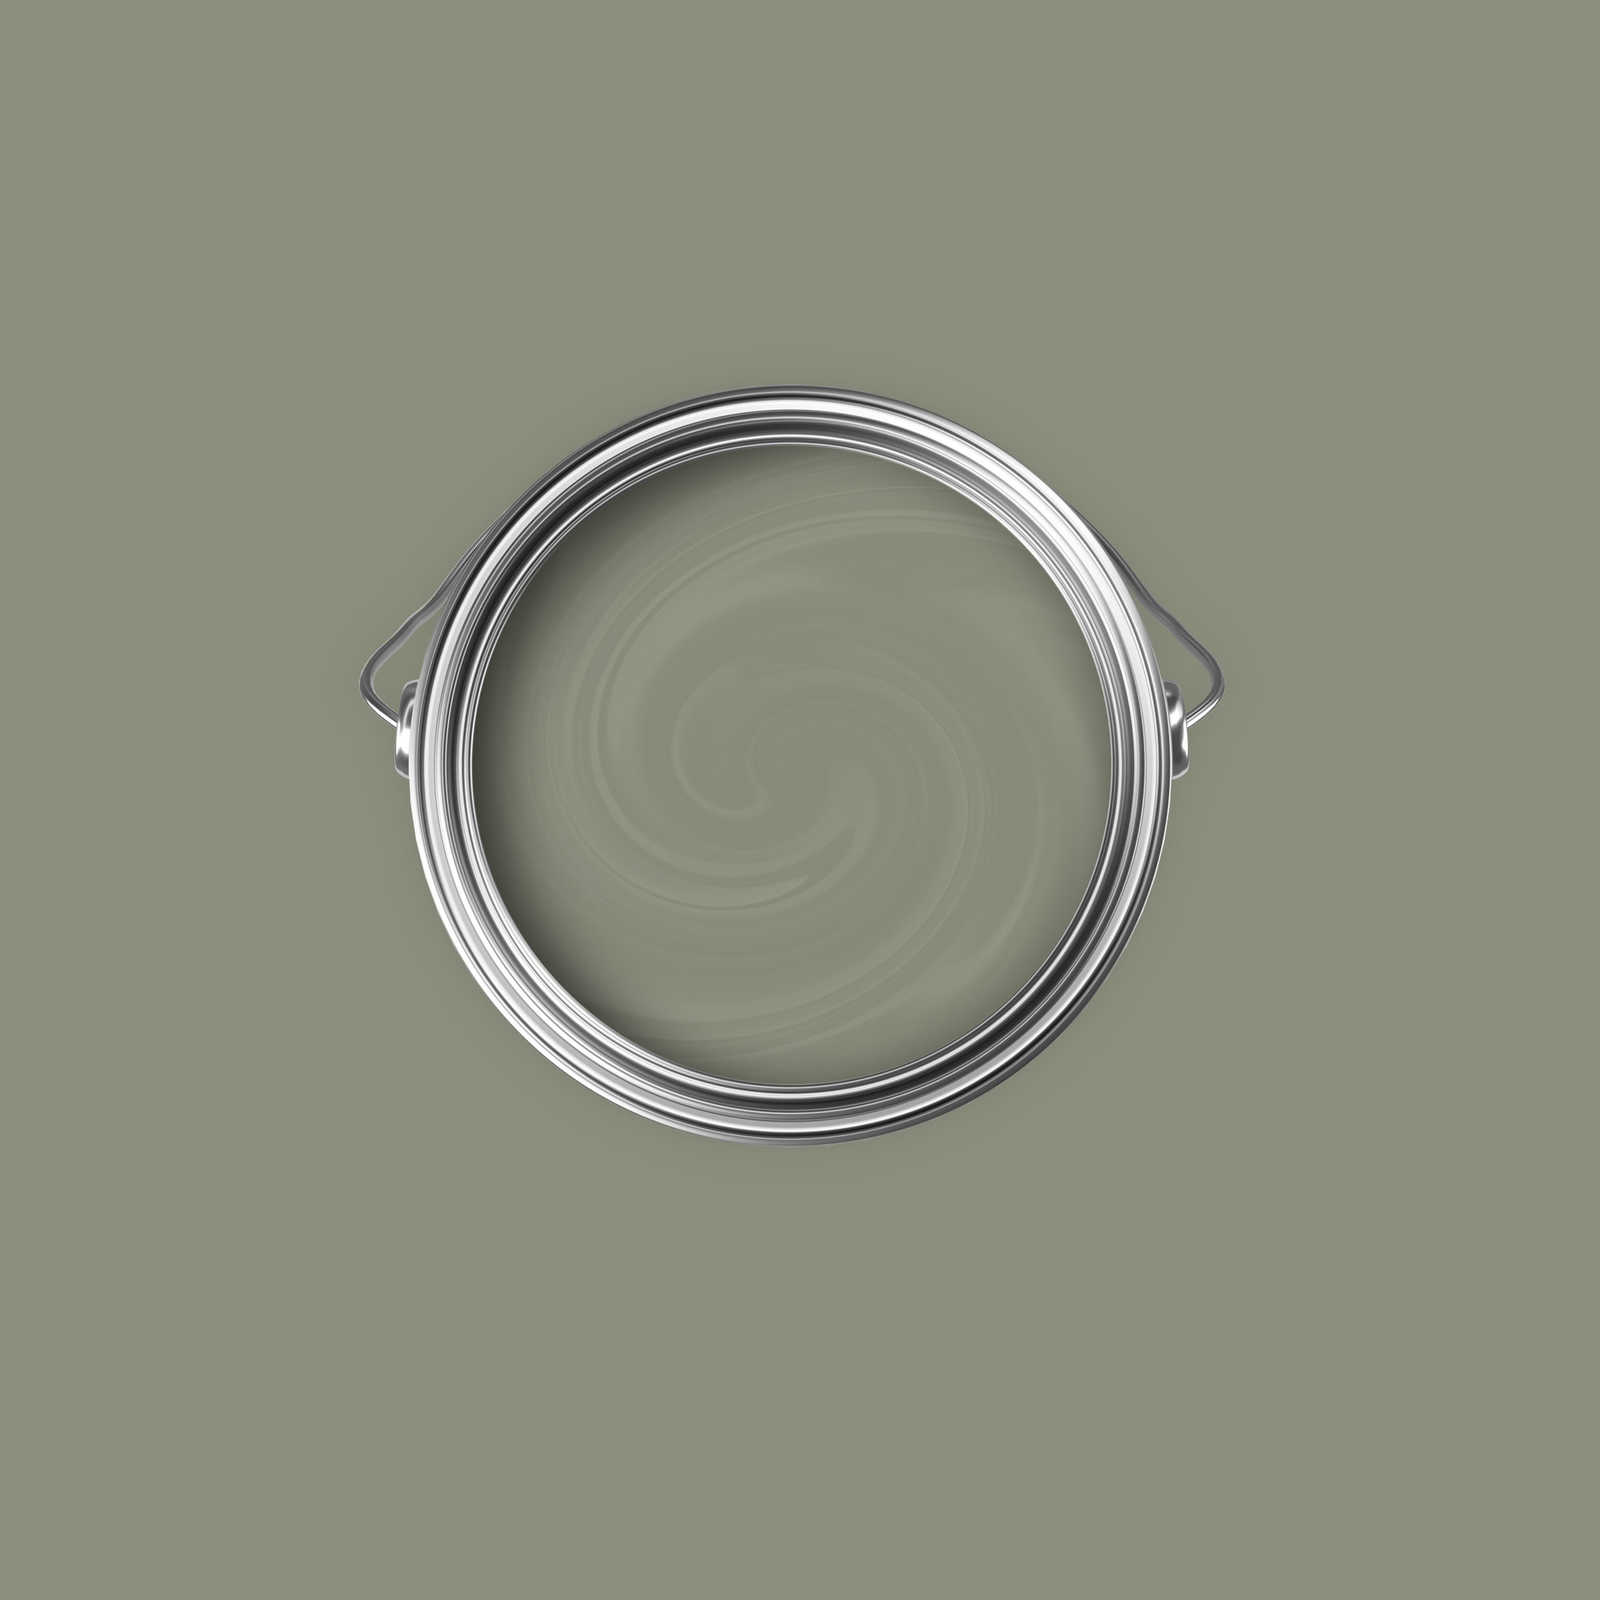             Premium Wall Paint Convincing Olive Green »Talented calm taupe« NW706 – 2.5 litre
        